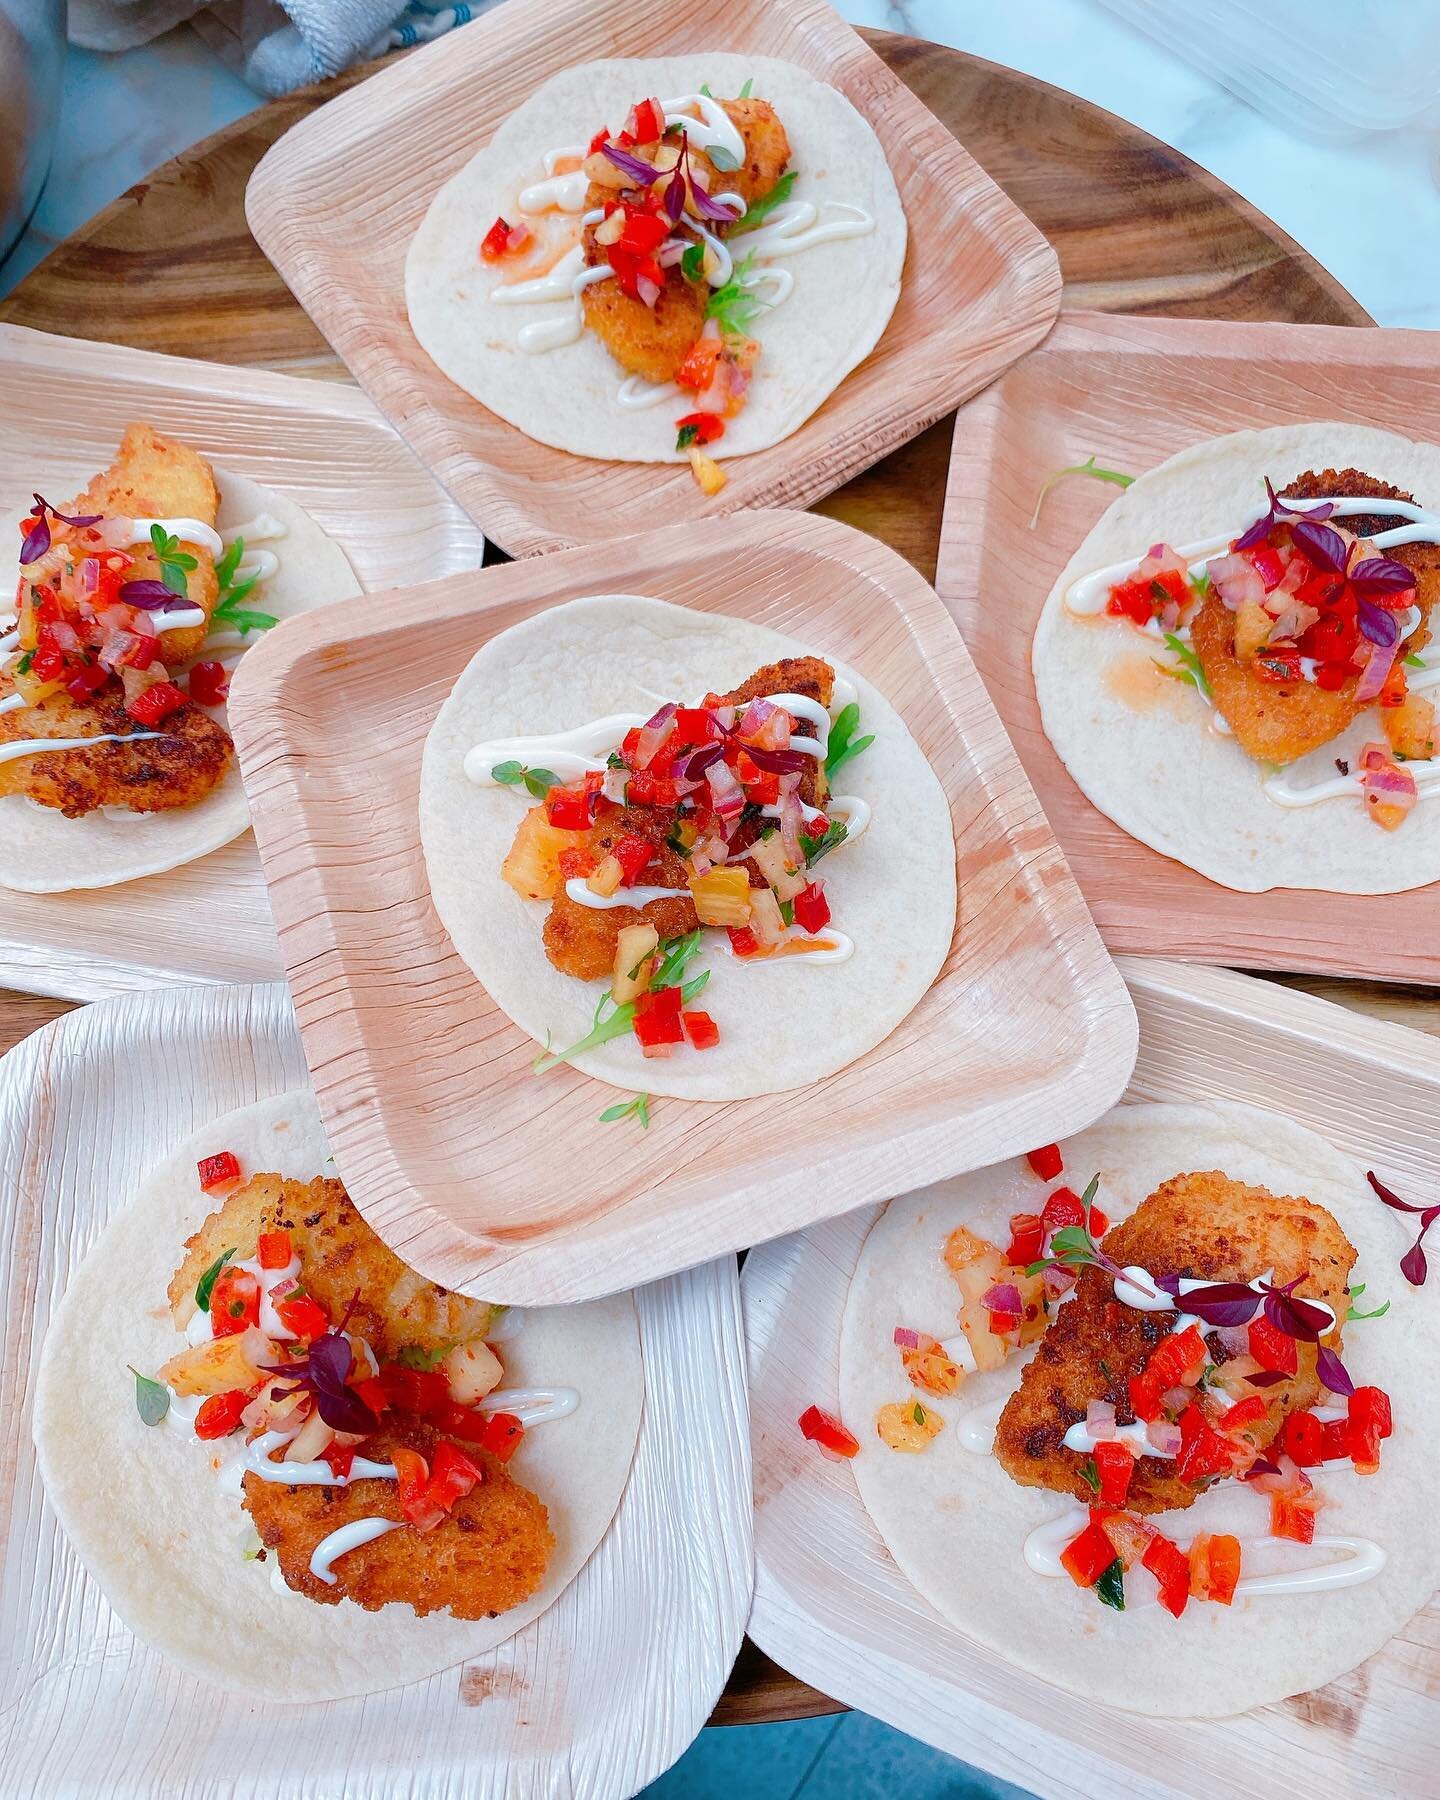 Mini tacos baby. 😍 Fish tacos baby. 😍 Chilli pineapple salsa. 😍 House signature. Absolute favs. I&rsquo;ll have three thanks!